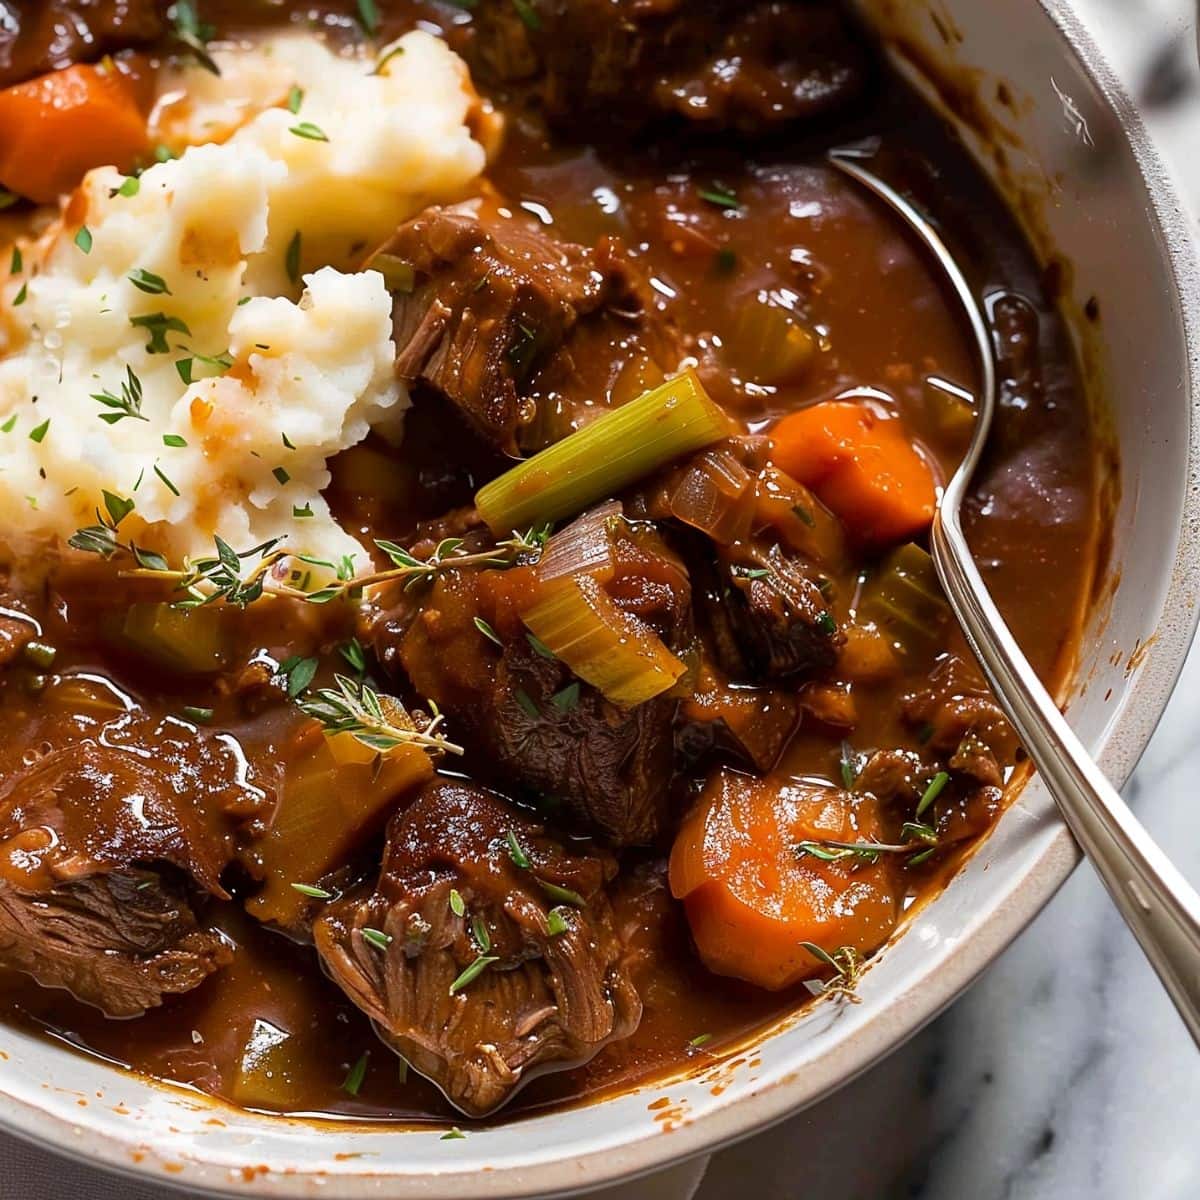 Guinness Beef Stew in a White Bowl with Meaty Beef, Celery, and Carrots over Mashed Potatoes with a Spoon